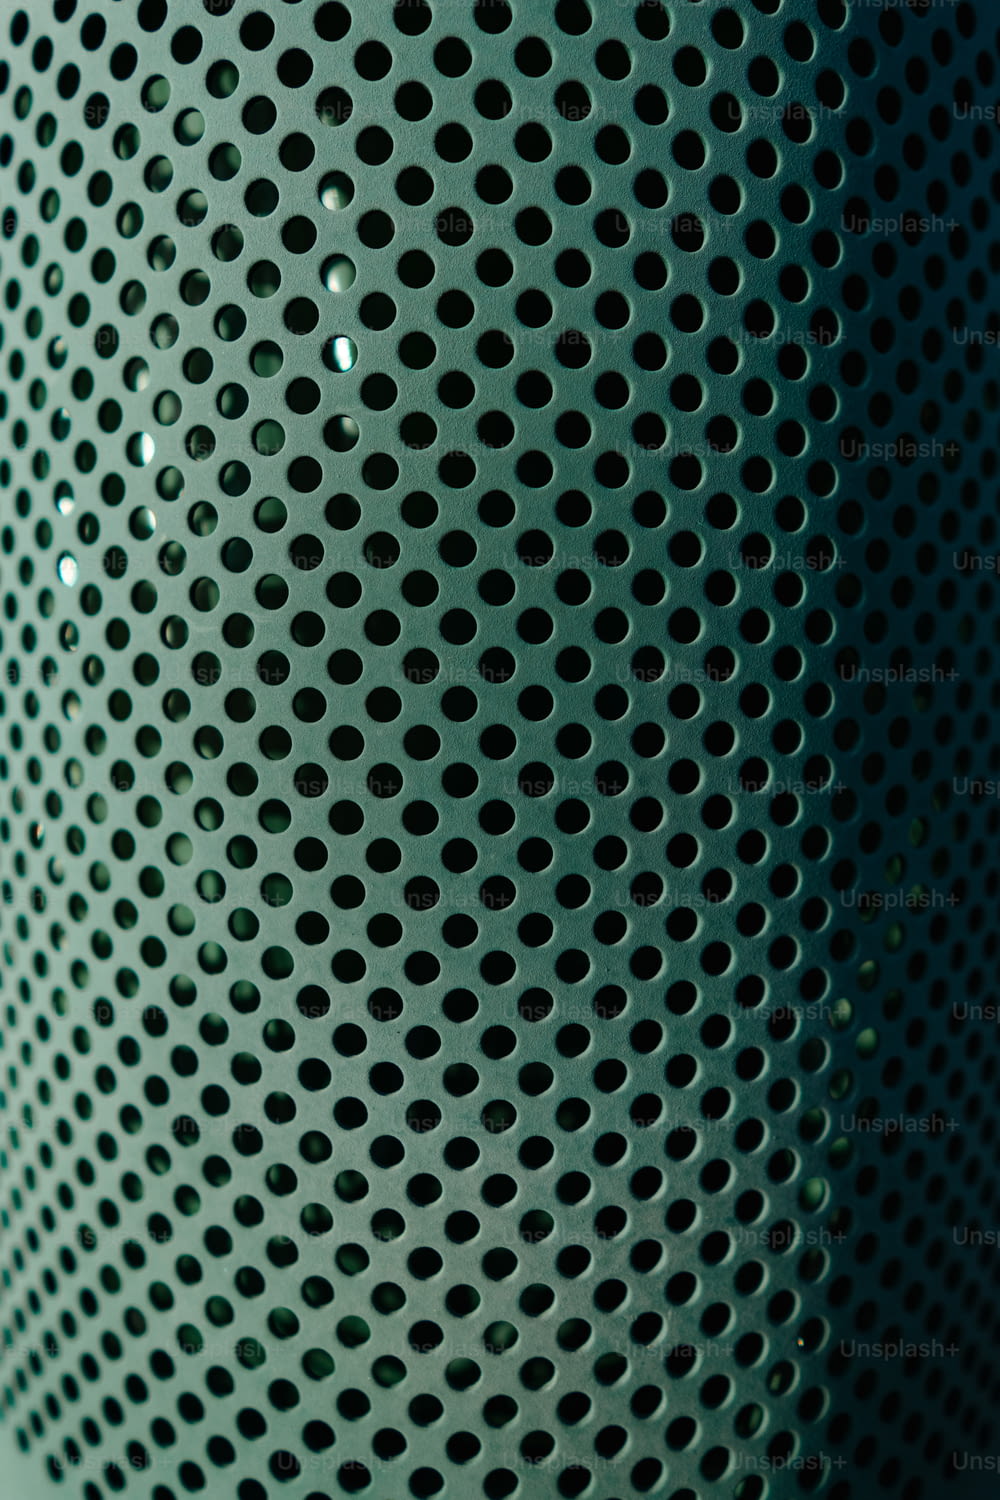 a close up of a metal object with holes